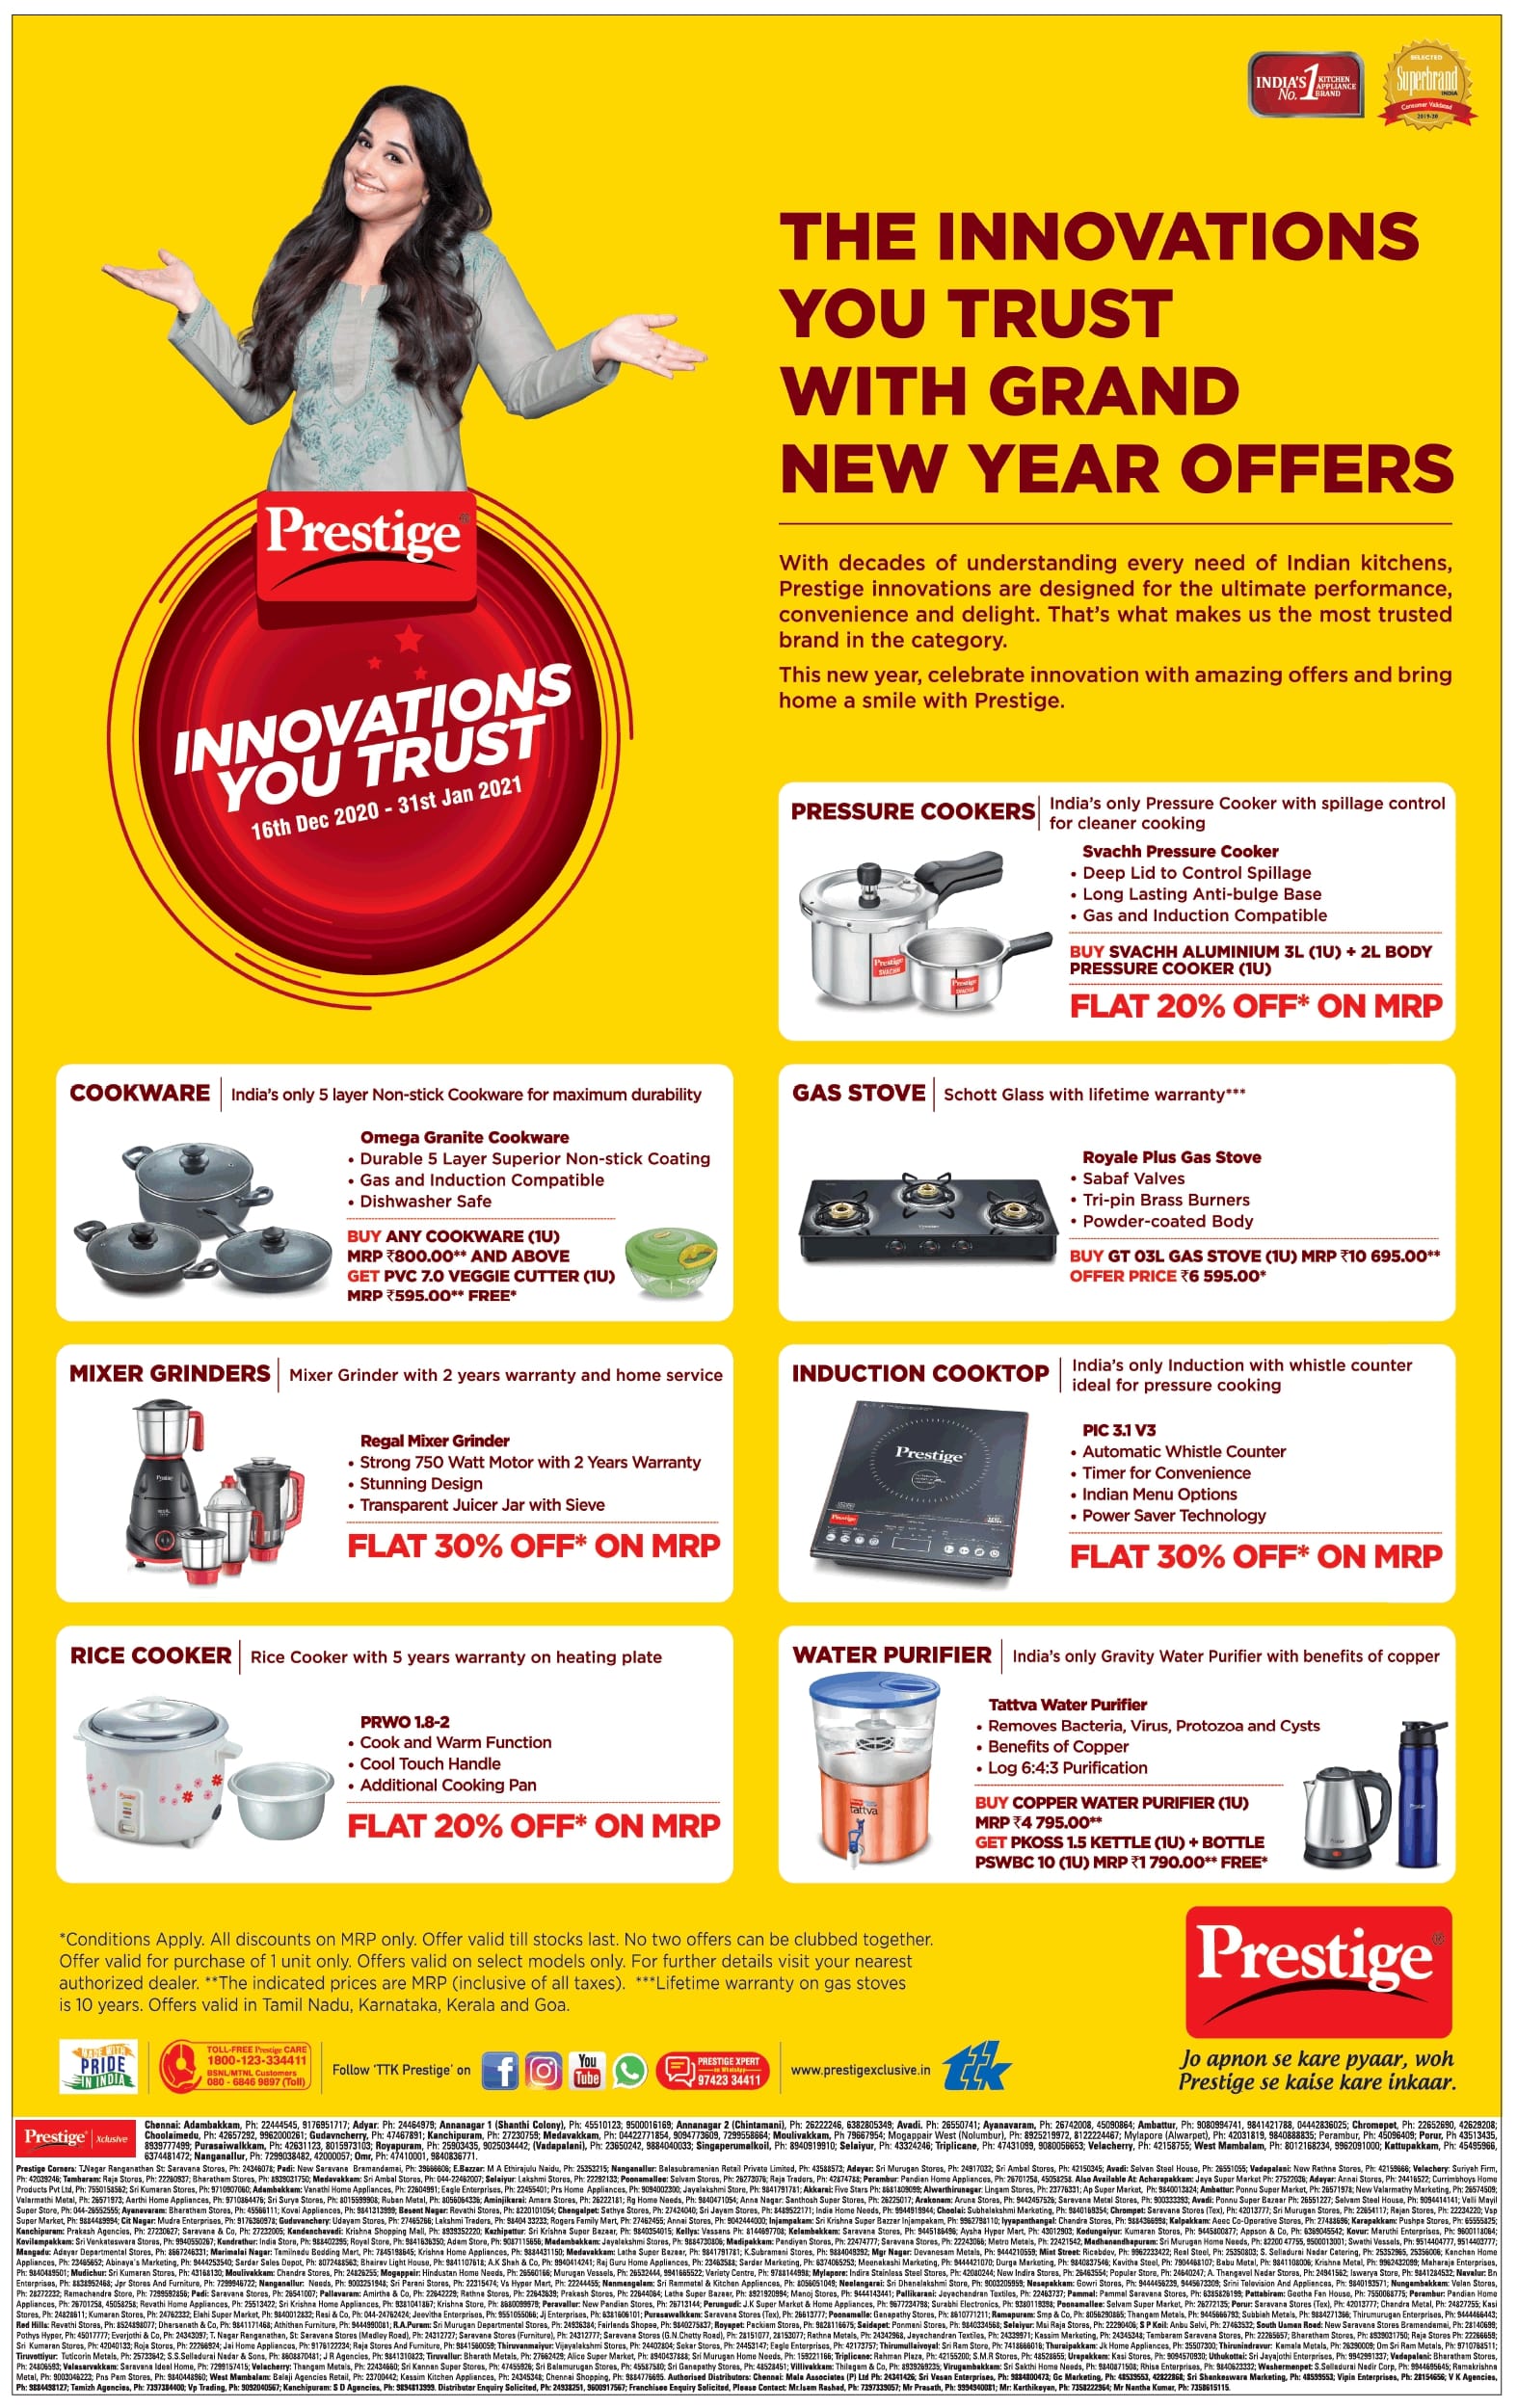 prestige-gas-stove-rice-cooker-water-purifier-ad-times-of-india-chennai-21-01-2021